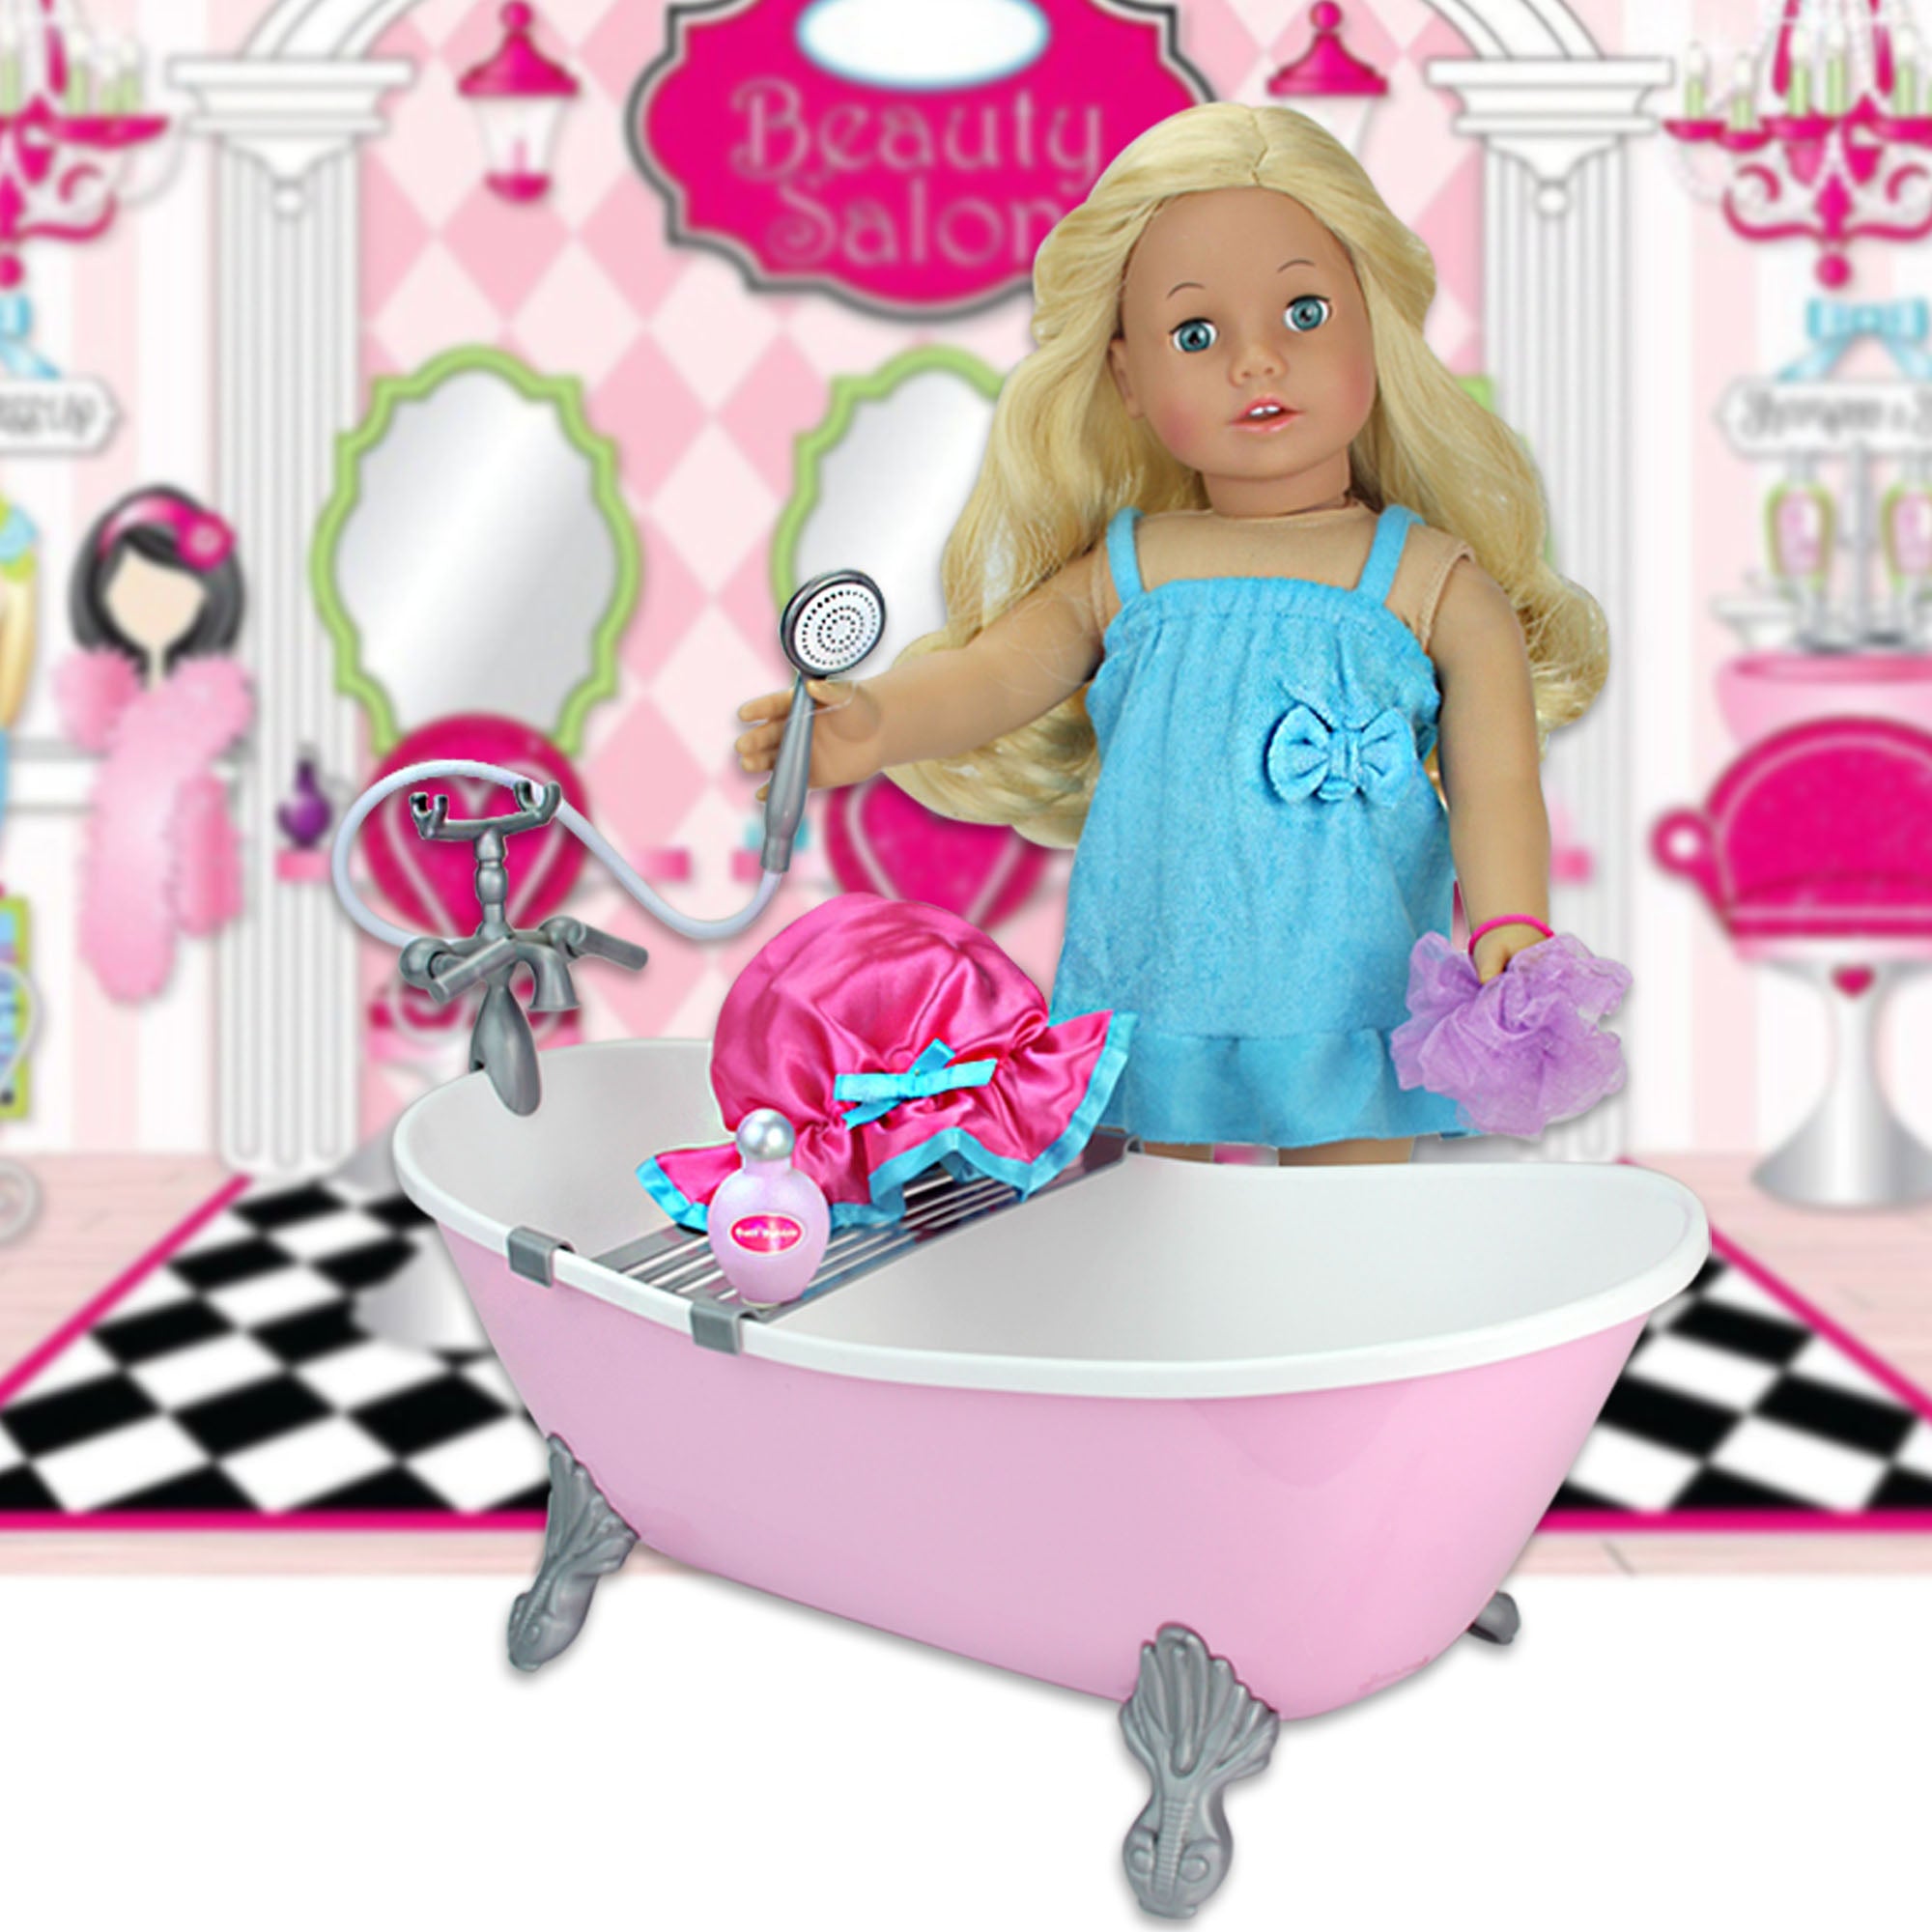 Sophia’s Pink Bathtub and Shower Accessories Set for 18" Dolls